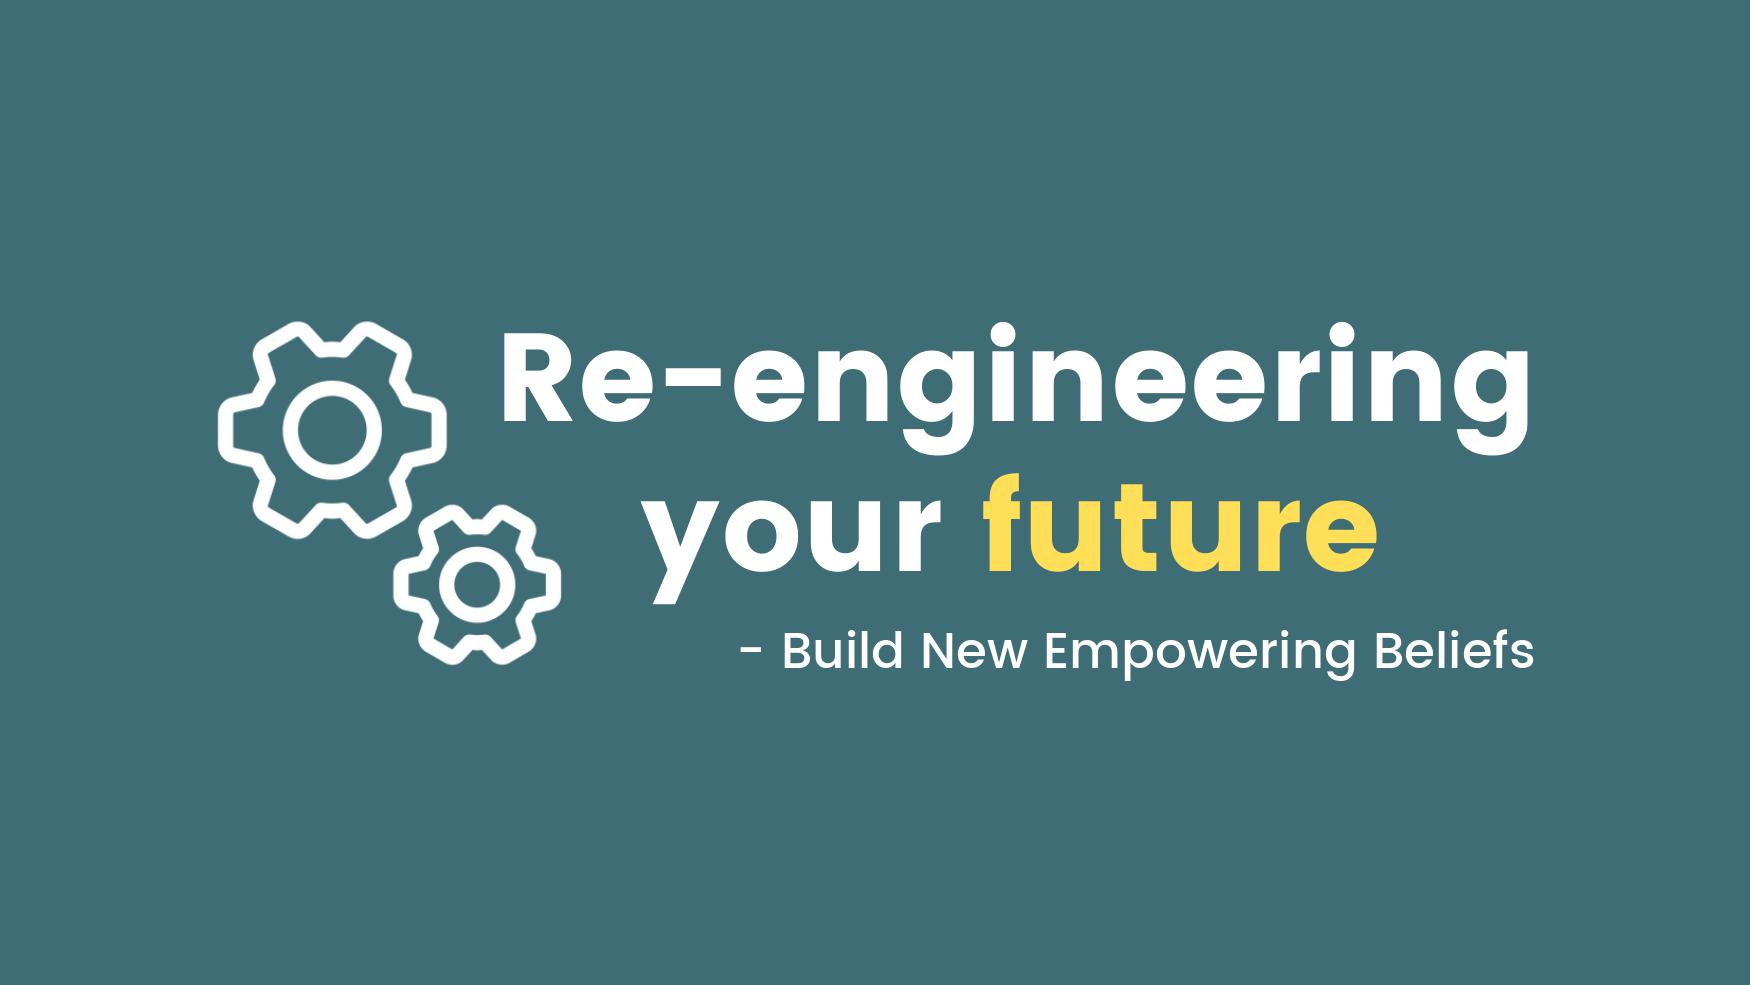 Re-engineering the past for the future